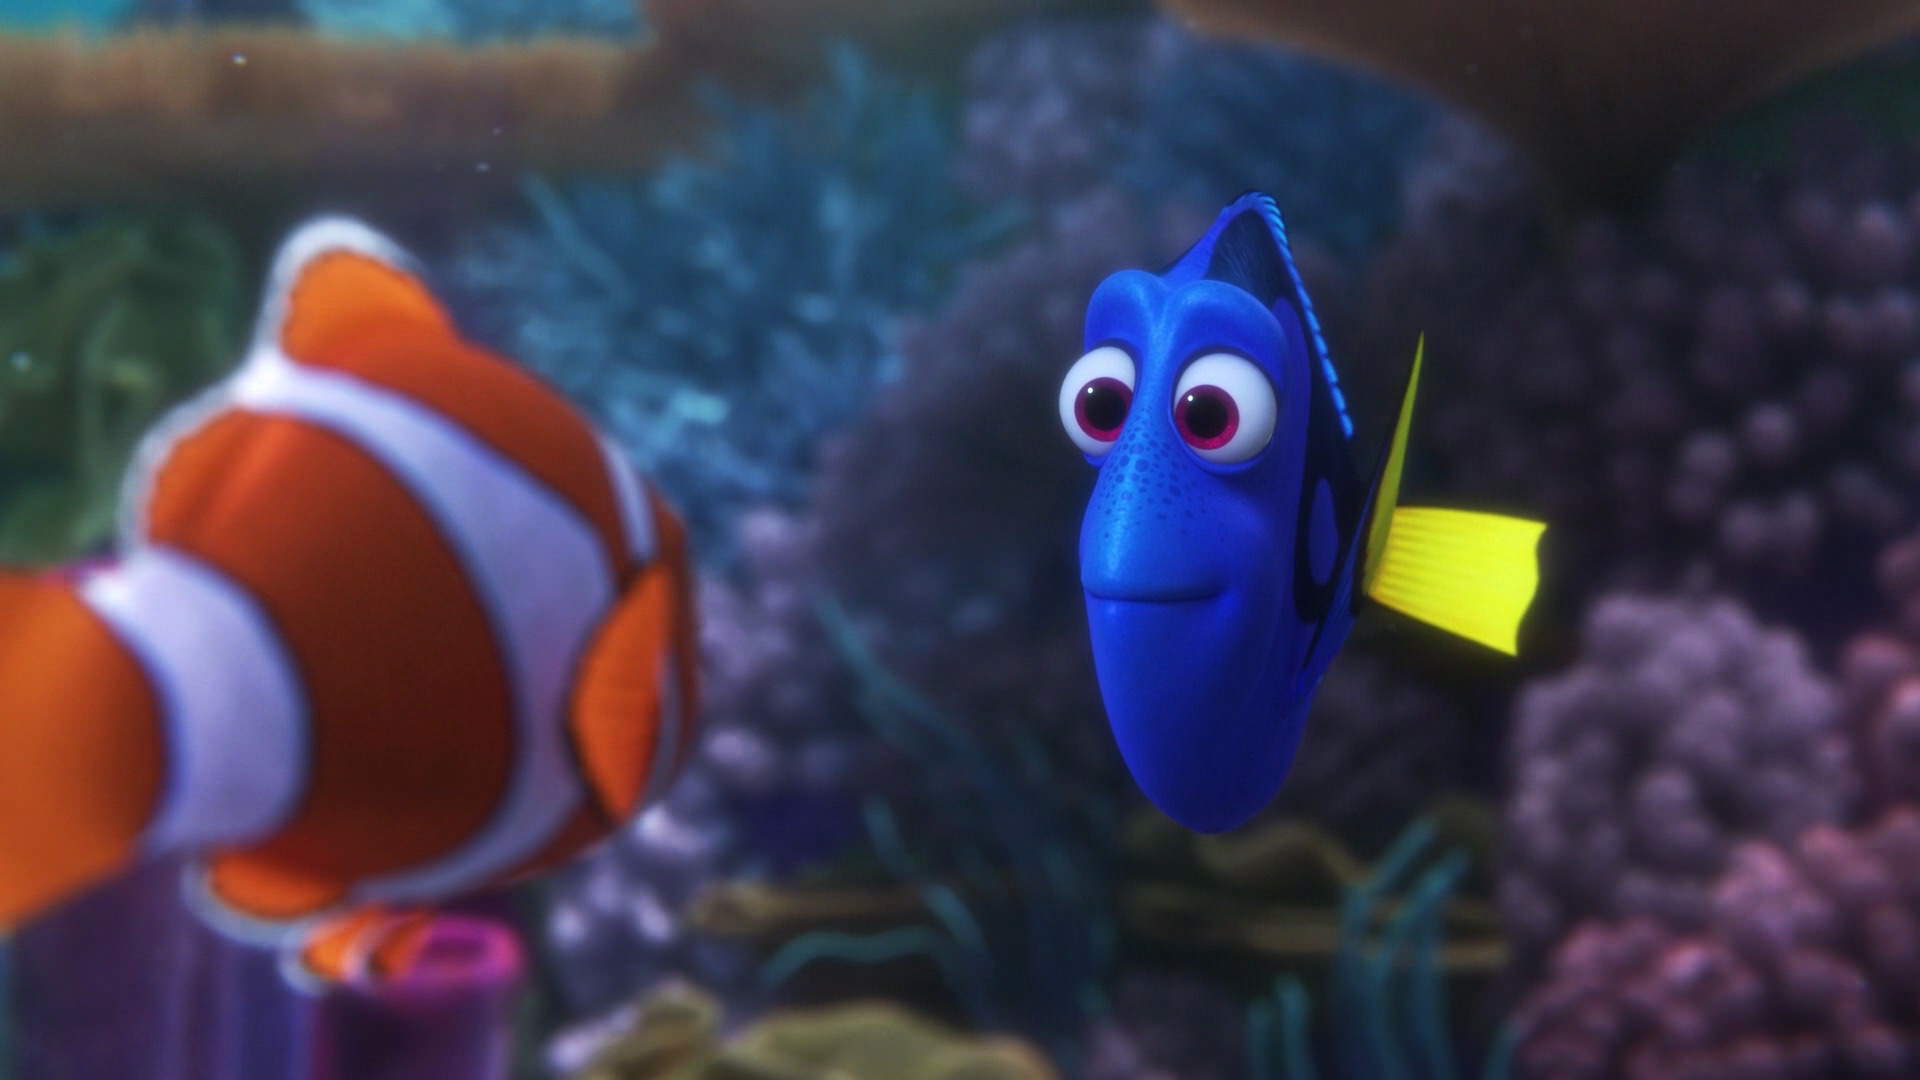 Finding Dory instal the new for windows